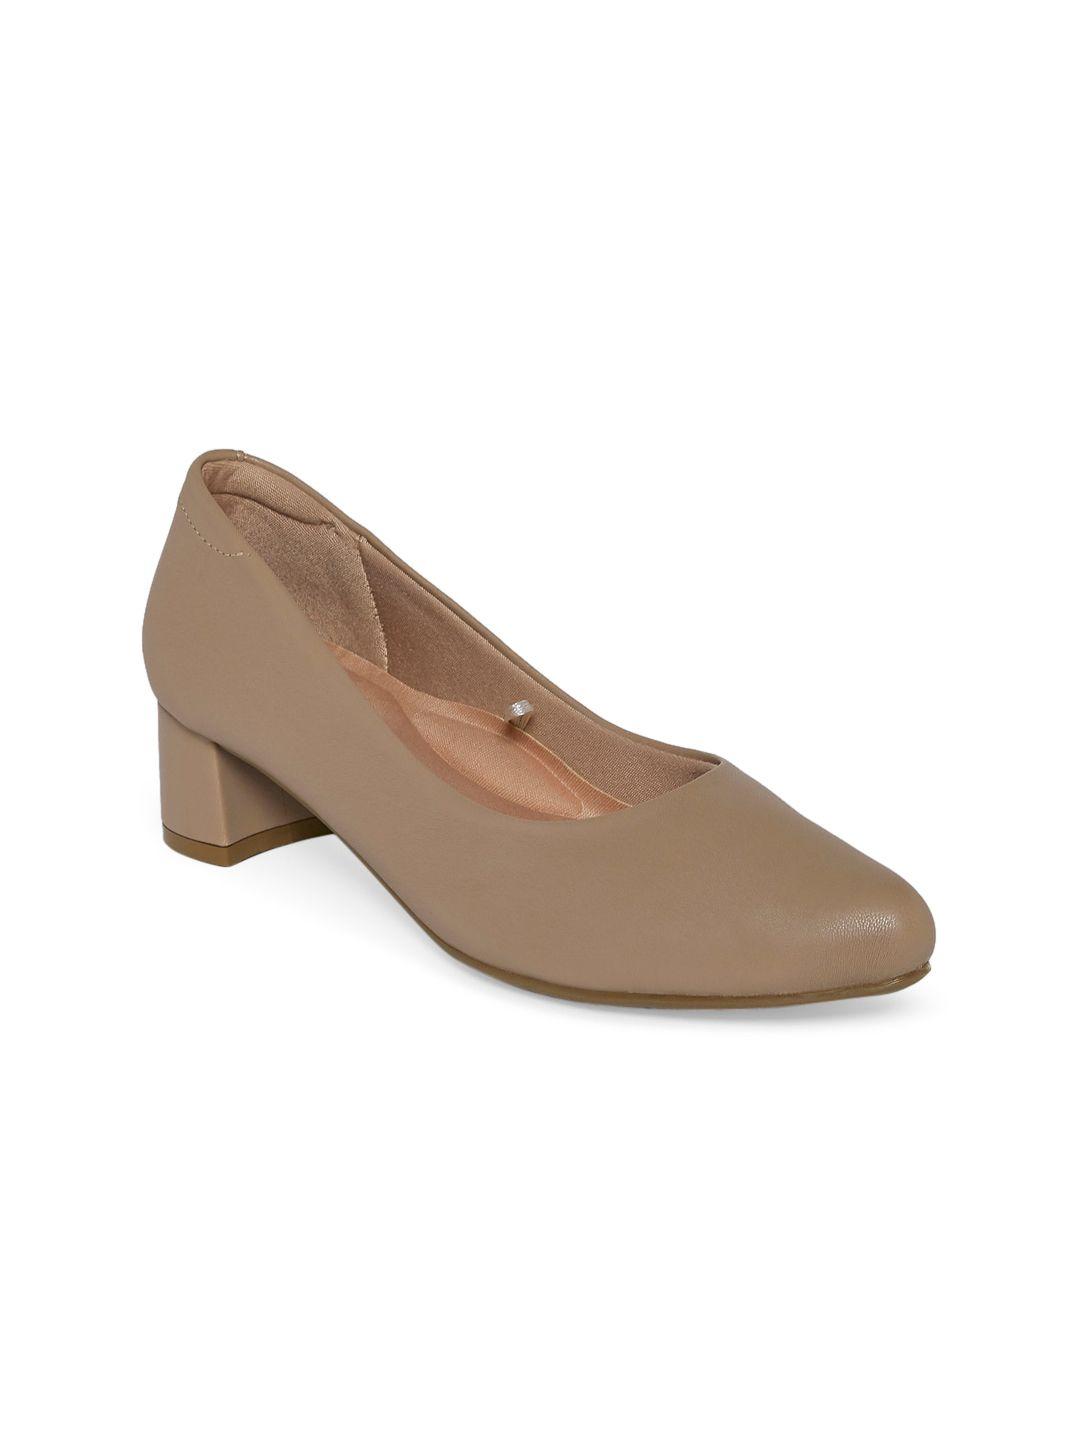 forever glam by pantaloons nude-coloured block pumps